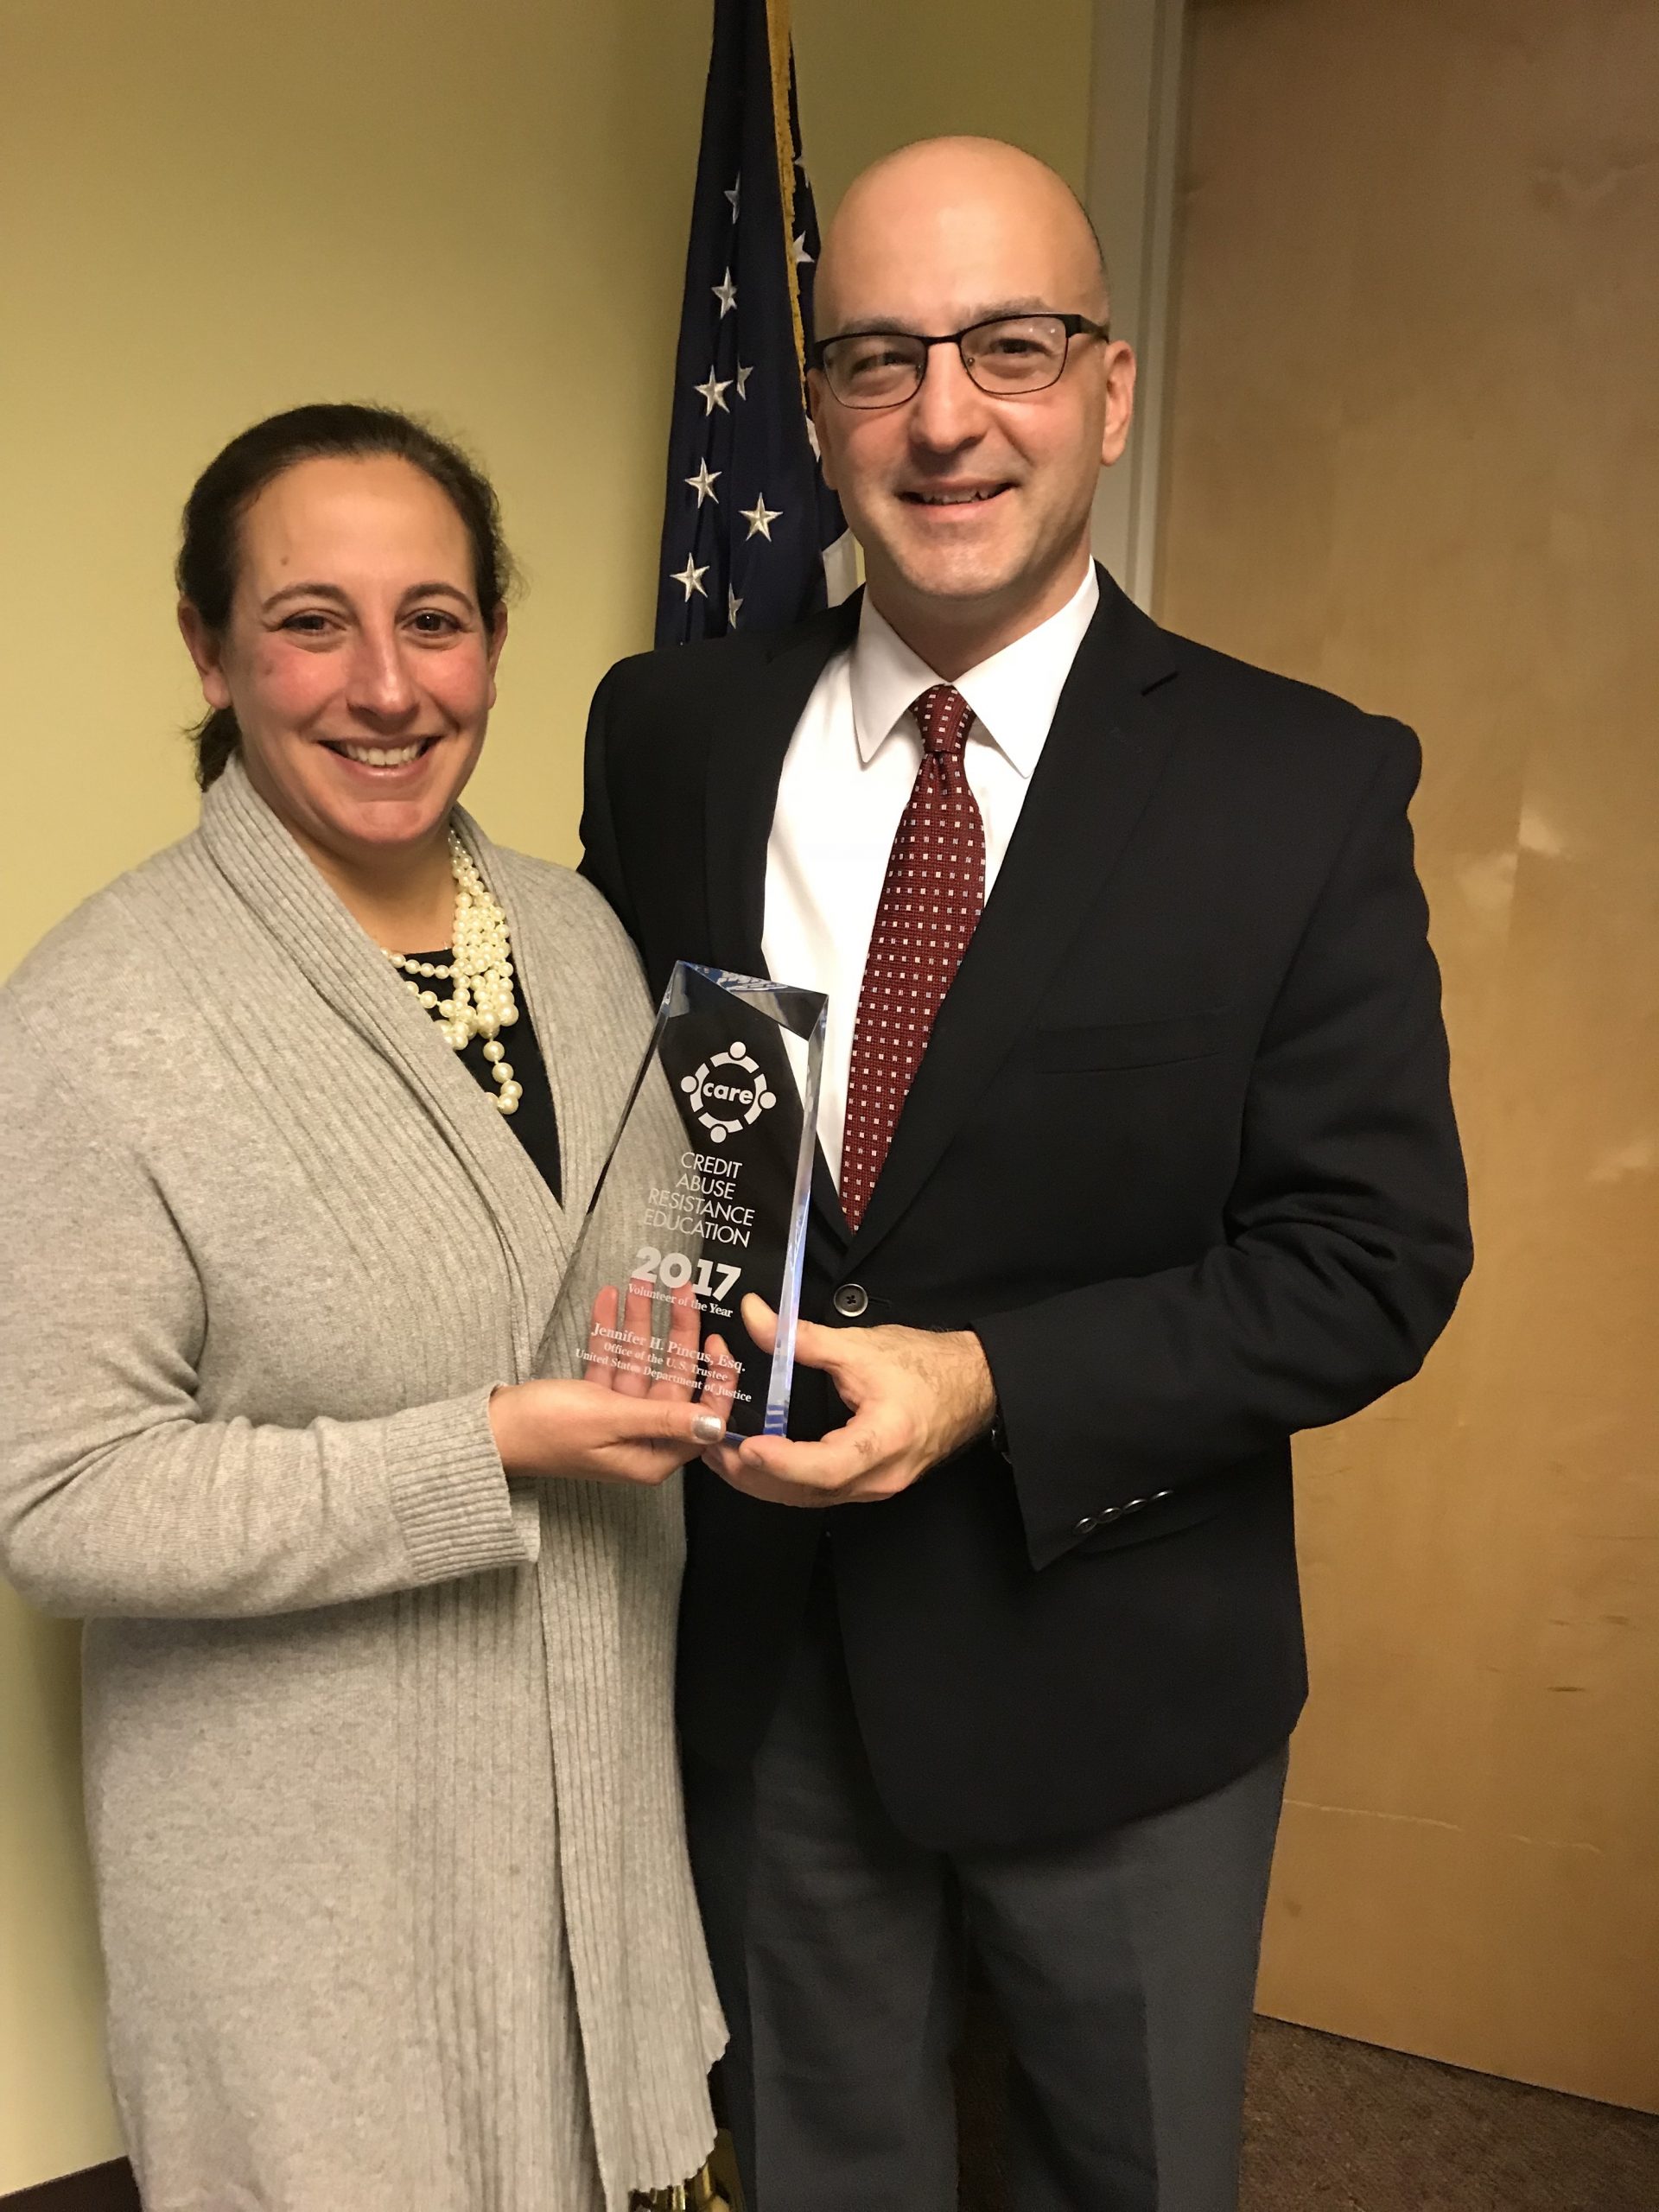 CARE Maine Coordinator Jennifer Pincus (U.S. Department of Justice, Office of the U.S. Trustee) receives the 2018 CARE Volunteer of the Year Award from Judge Michael Fagone (U.S. Bankruptcy Court, District of Maine). Judge Fagone accepted the award on her behalf in November 2017.